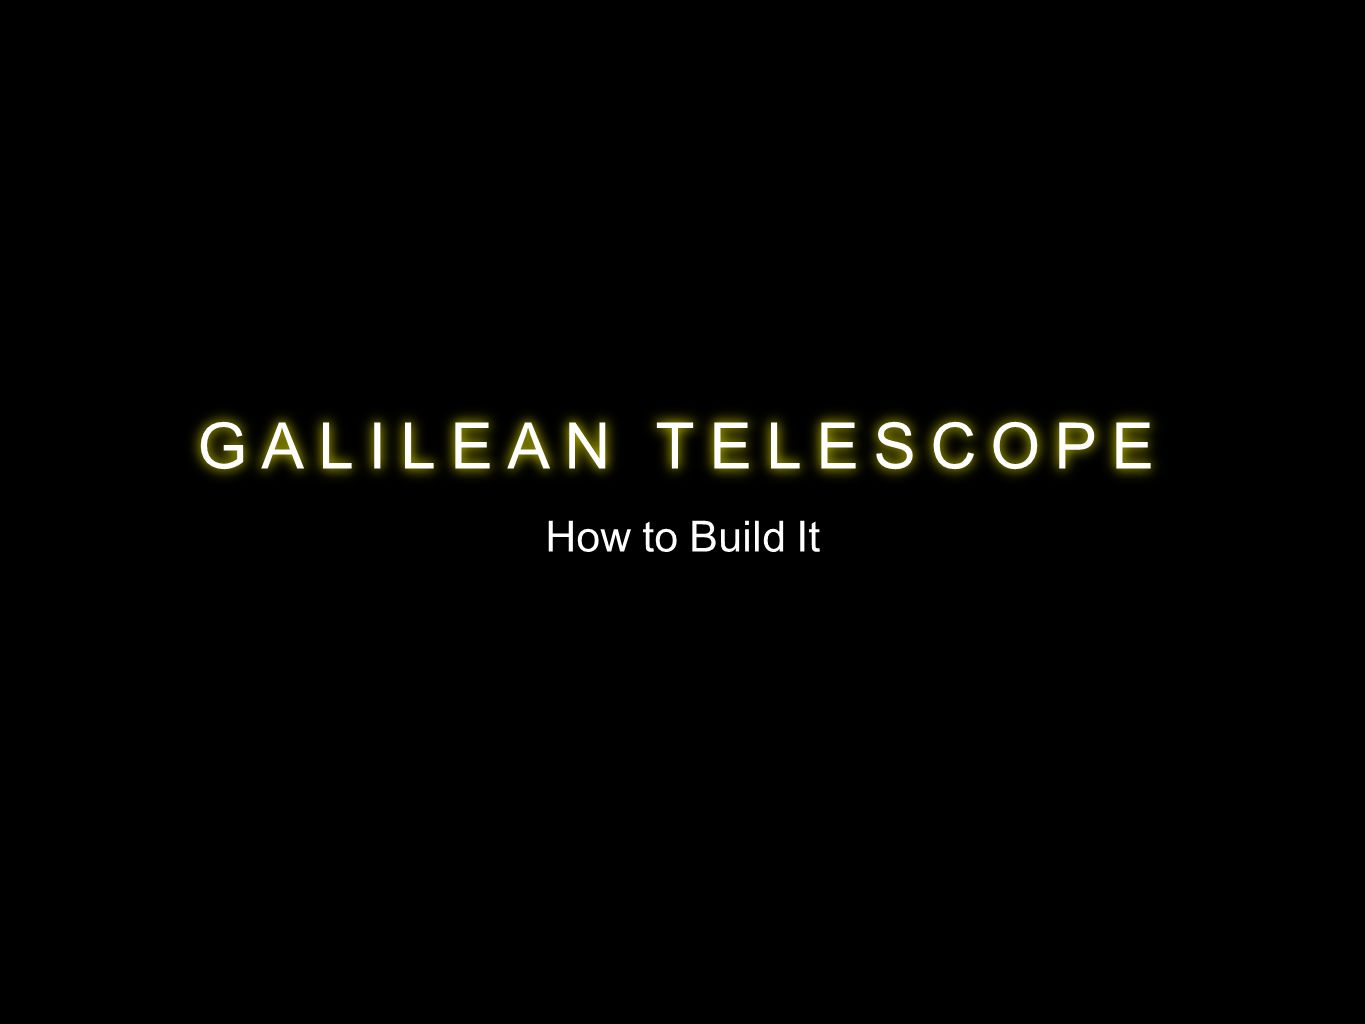 GALILEAN TELESCOPE How to Build It